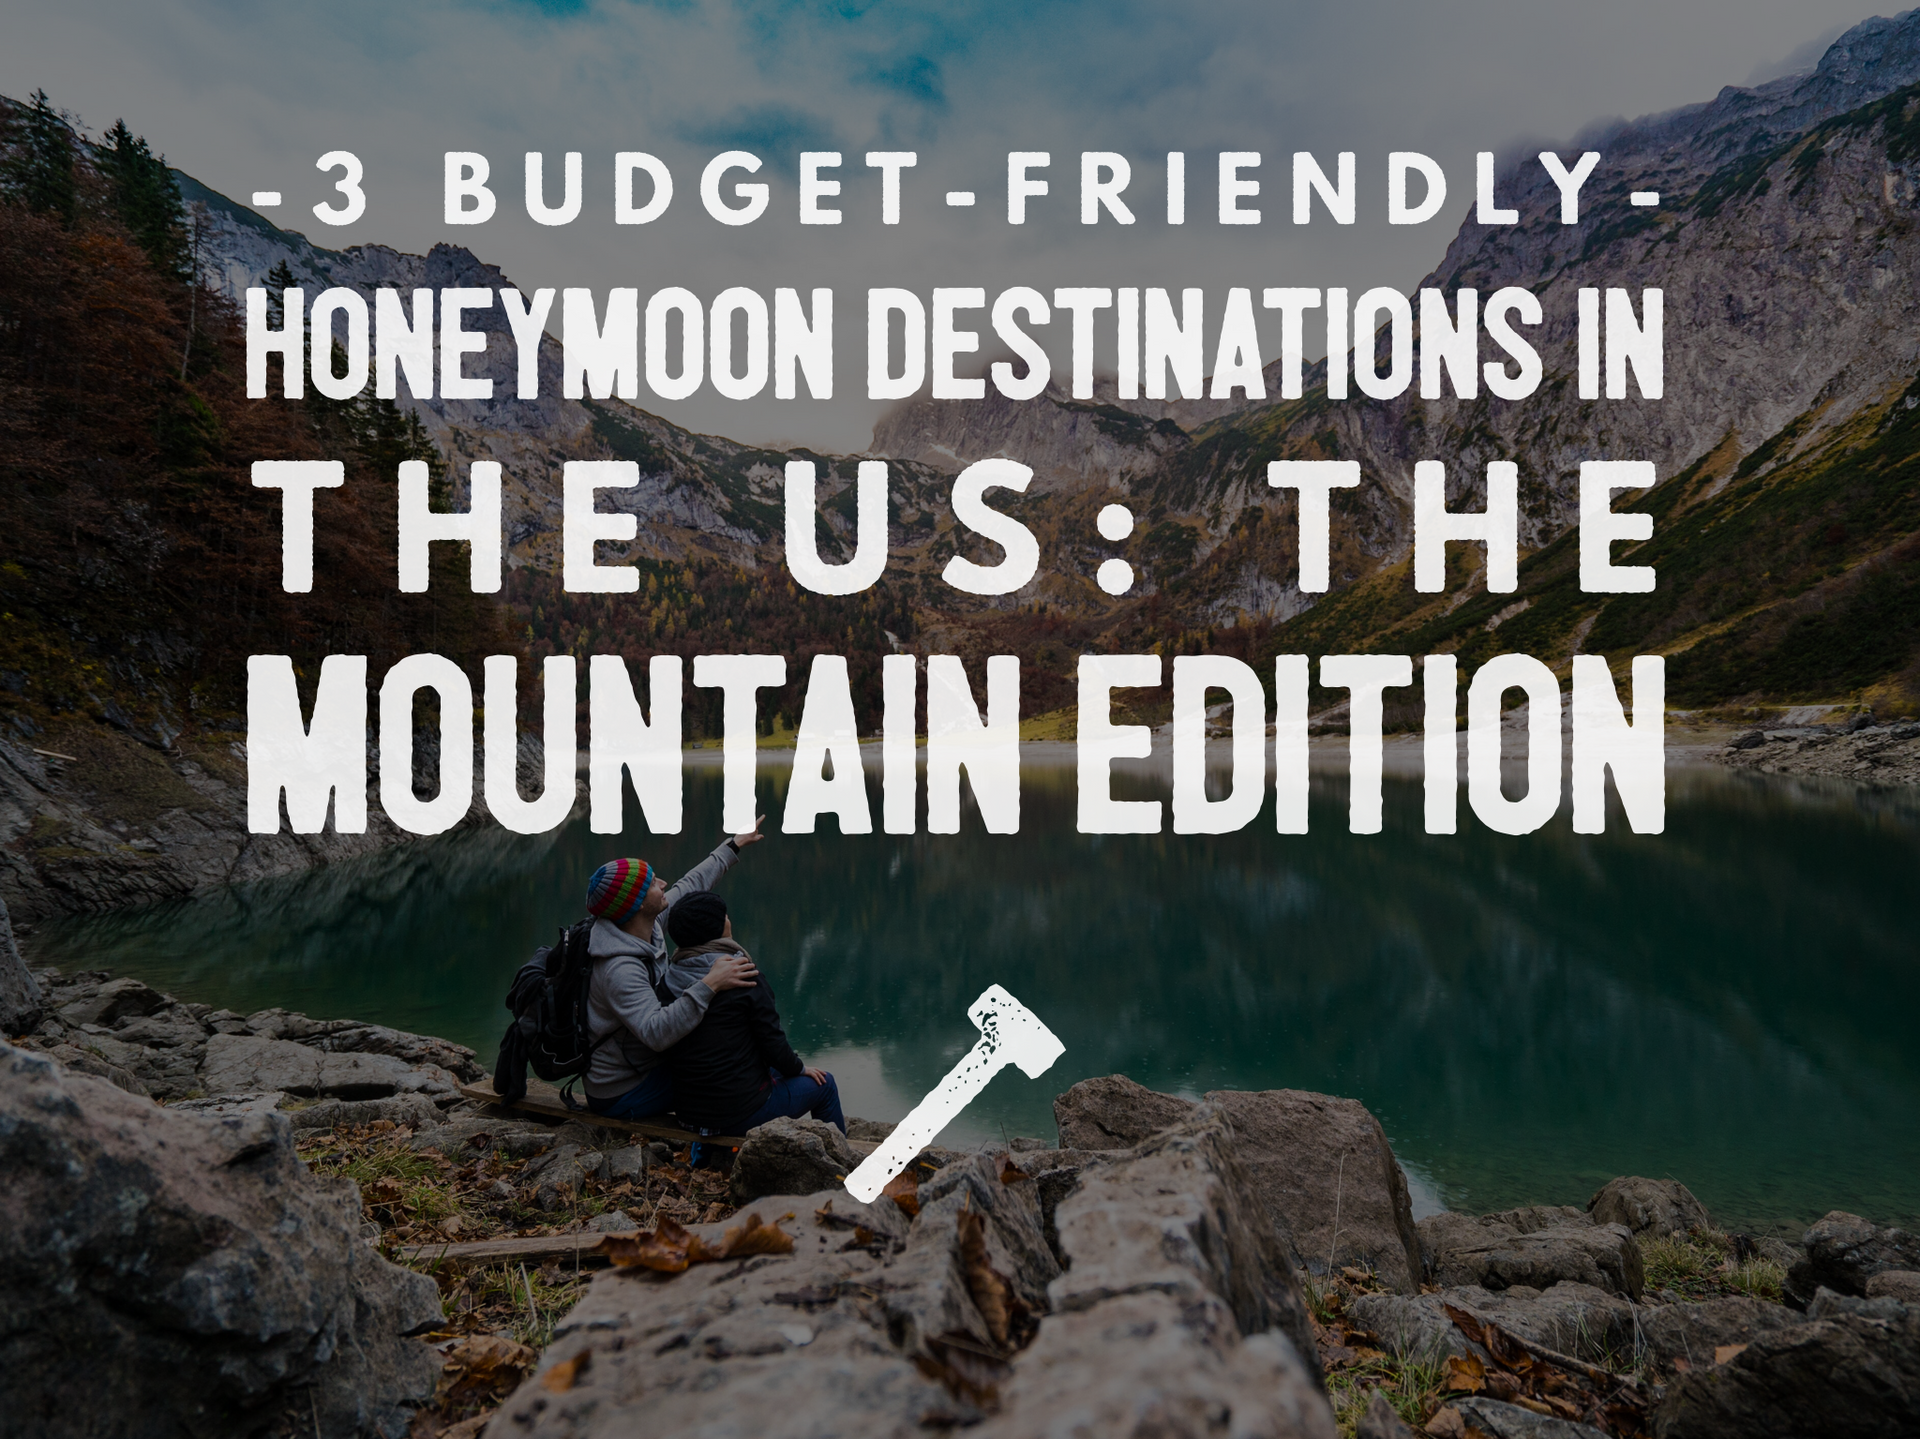 3 Budget-Friendly Honeymoon Destinations in the US: The Mountain Edition